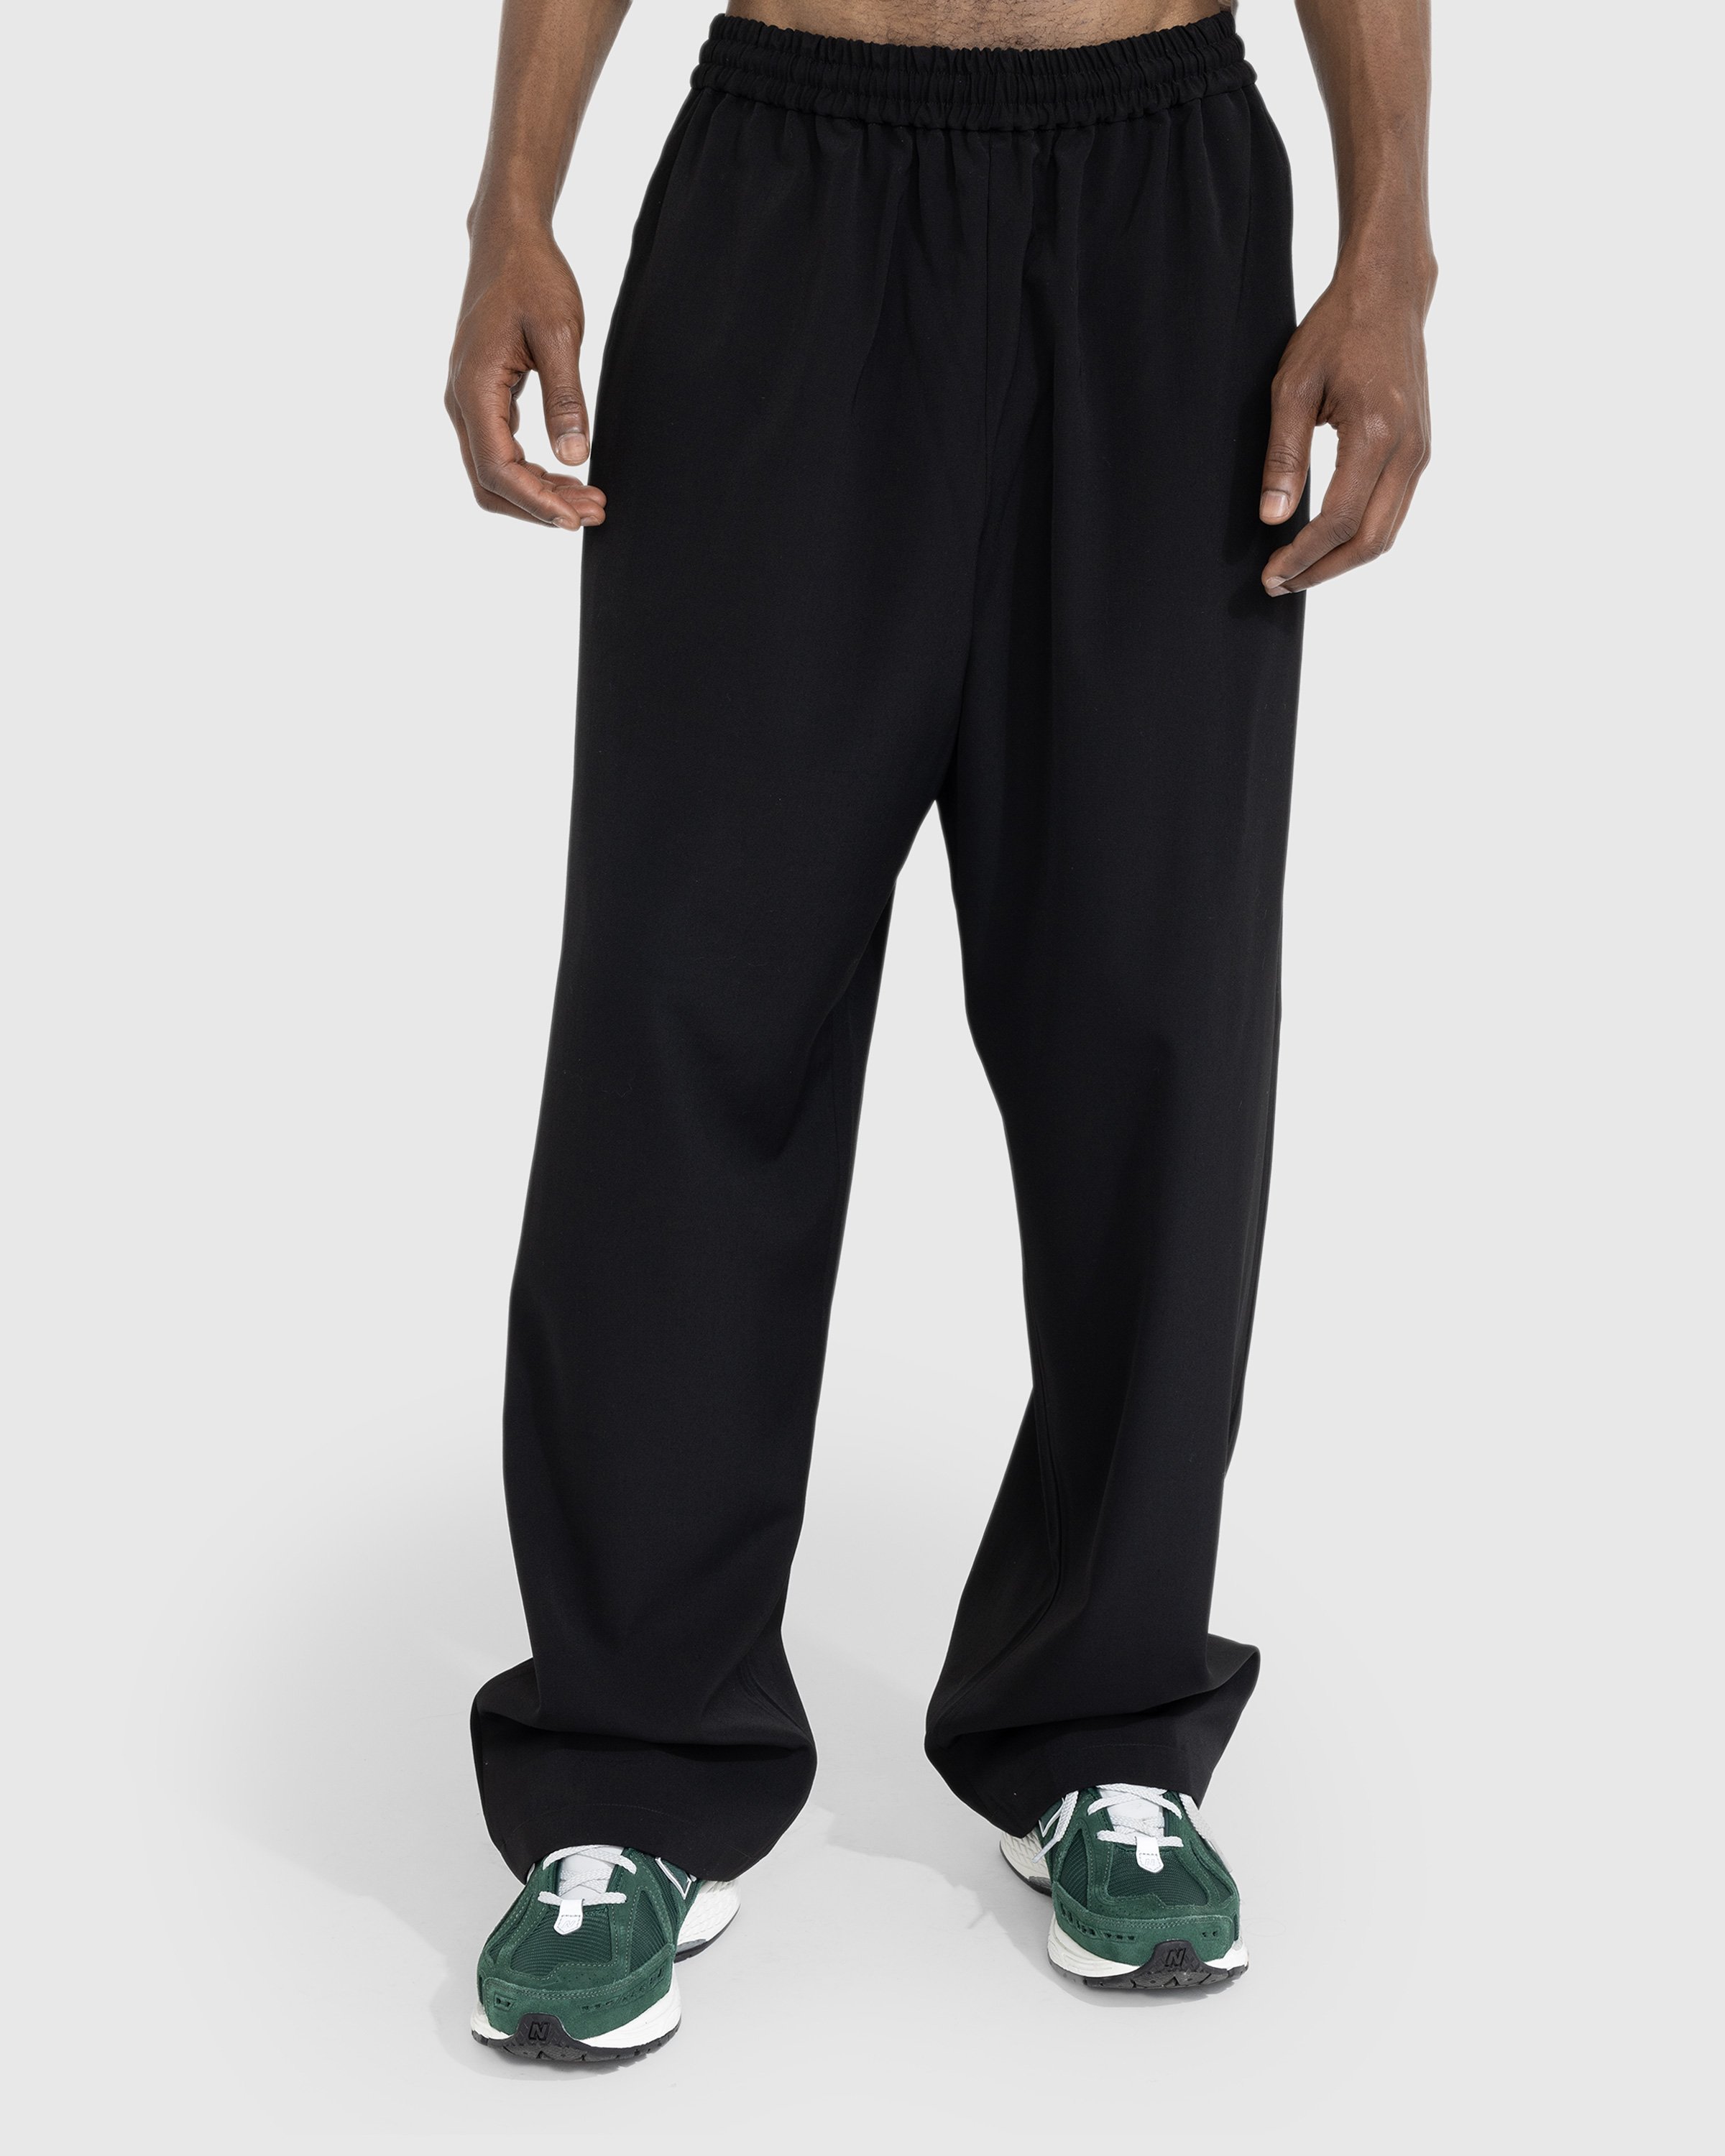 Acne Studios - Relaxed Fit Trousers Black - Clothing - Black - Image 2